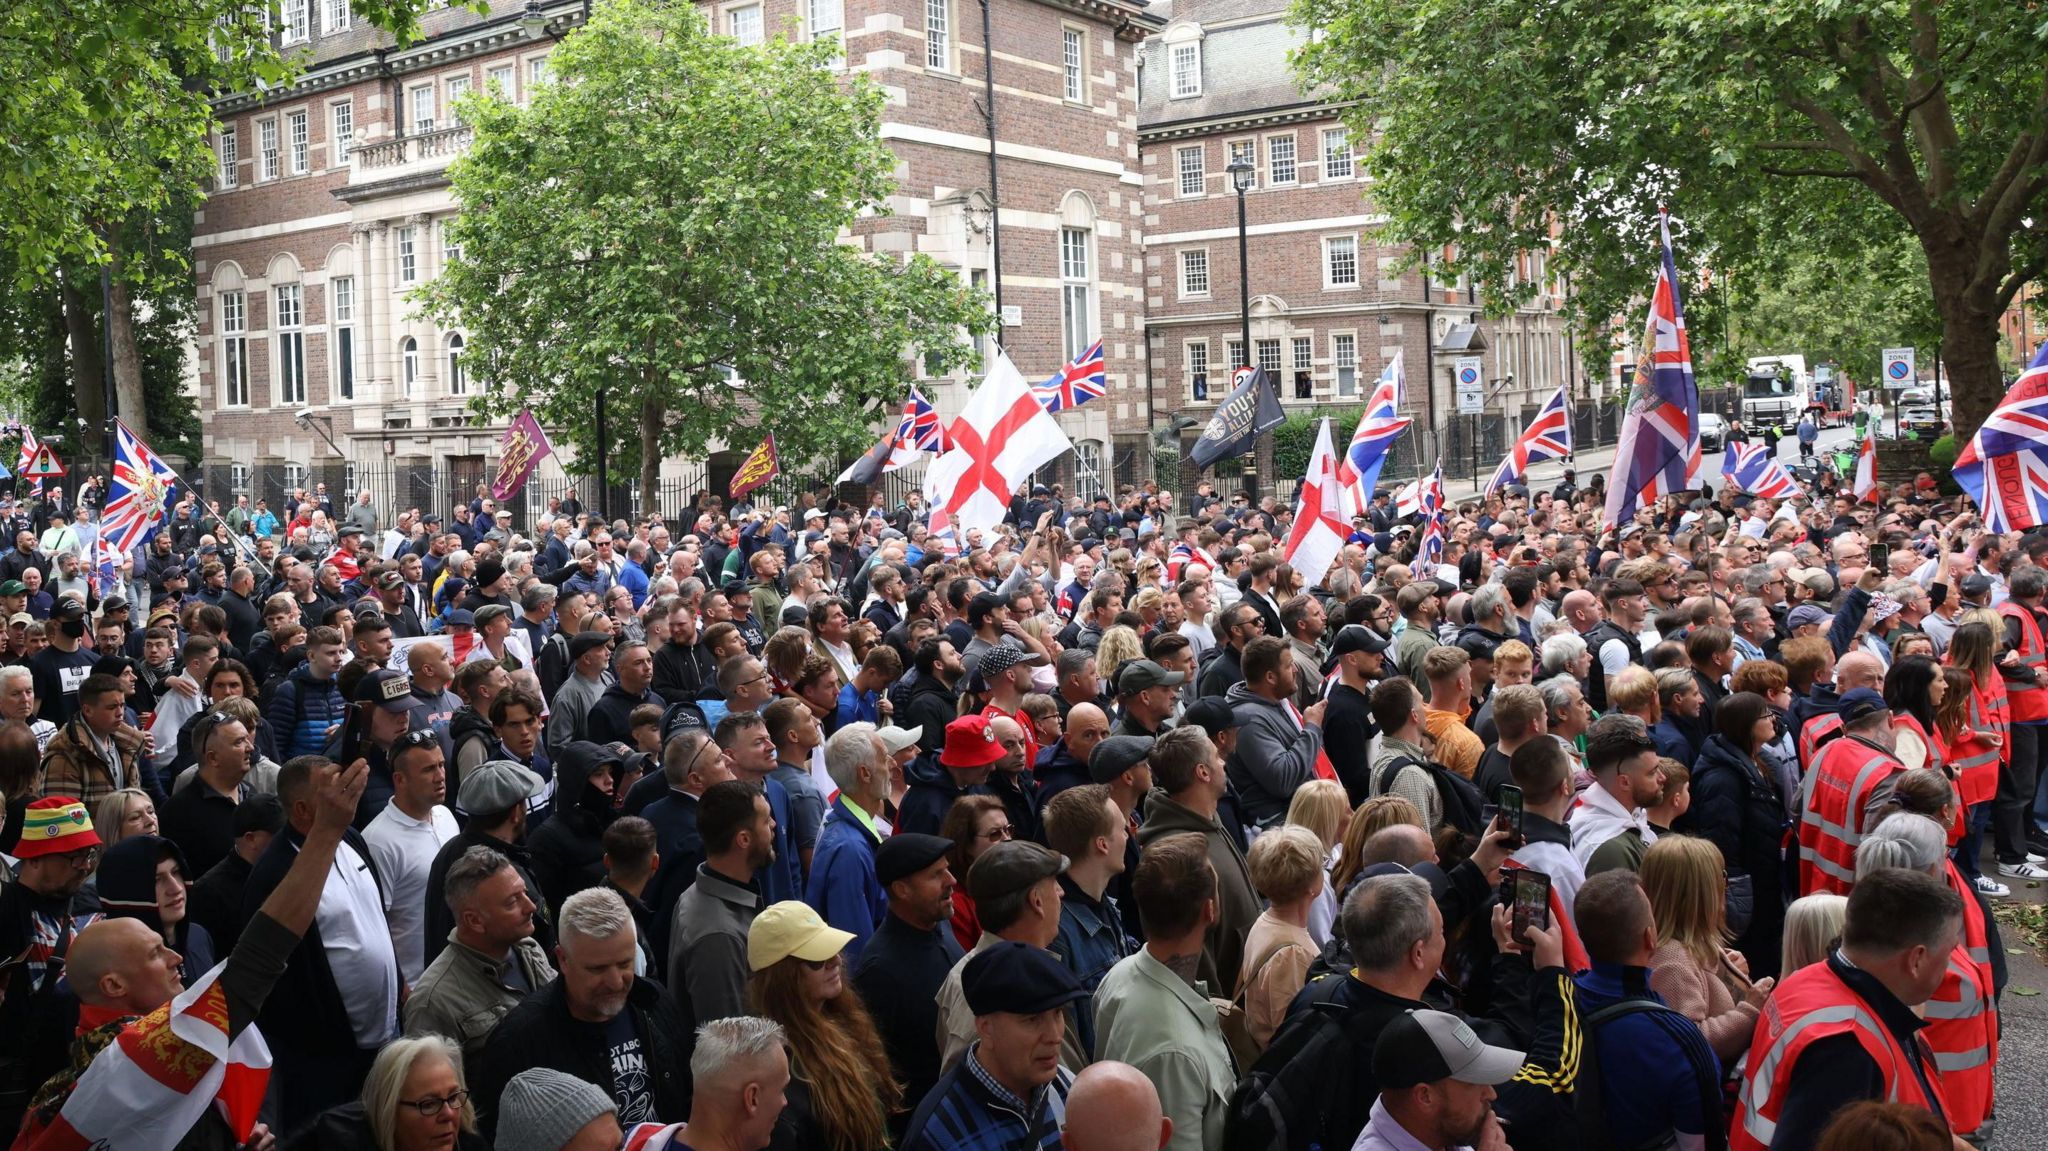 People take part in a protest march through London, organised by Tommy Robinson